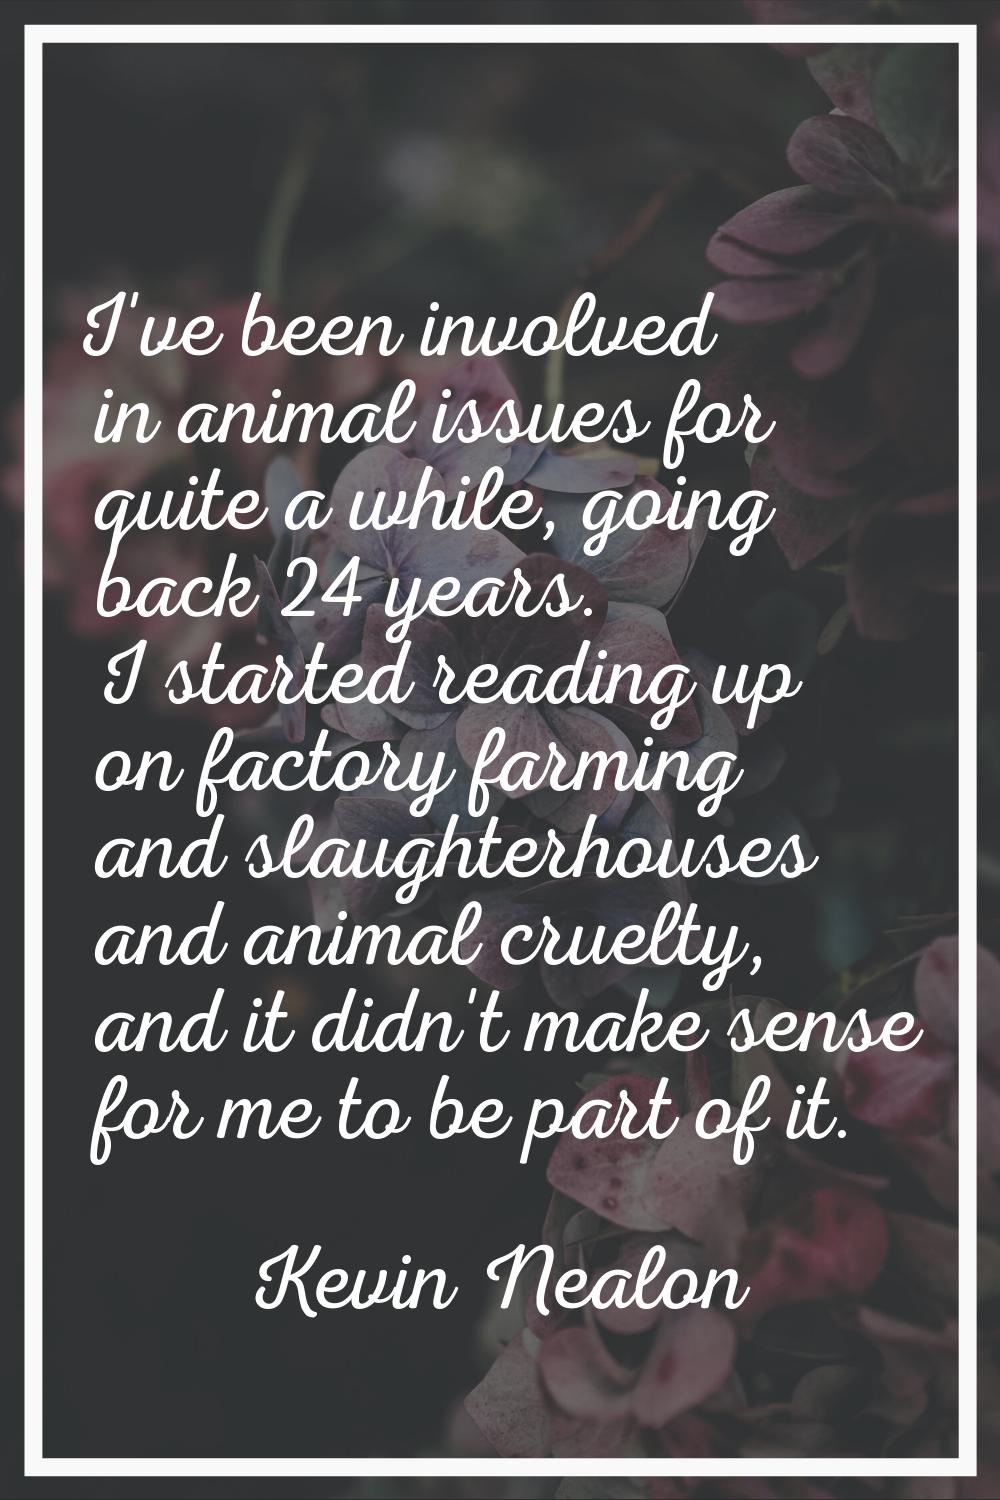 I've been involved in animal issues for quite a while, going back 24 years. I started reading up on